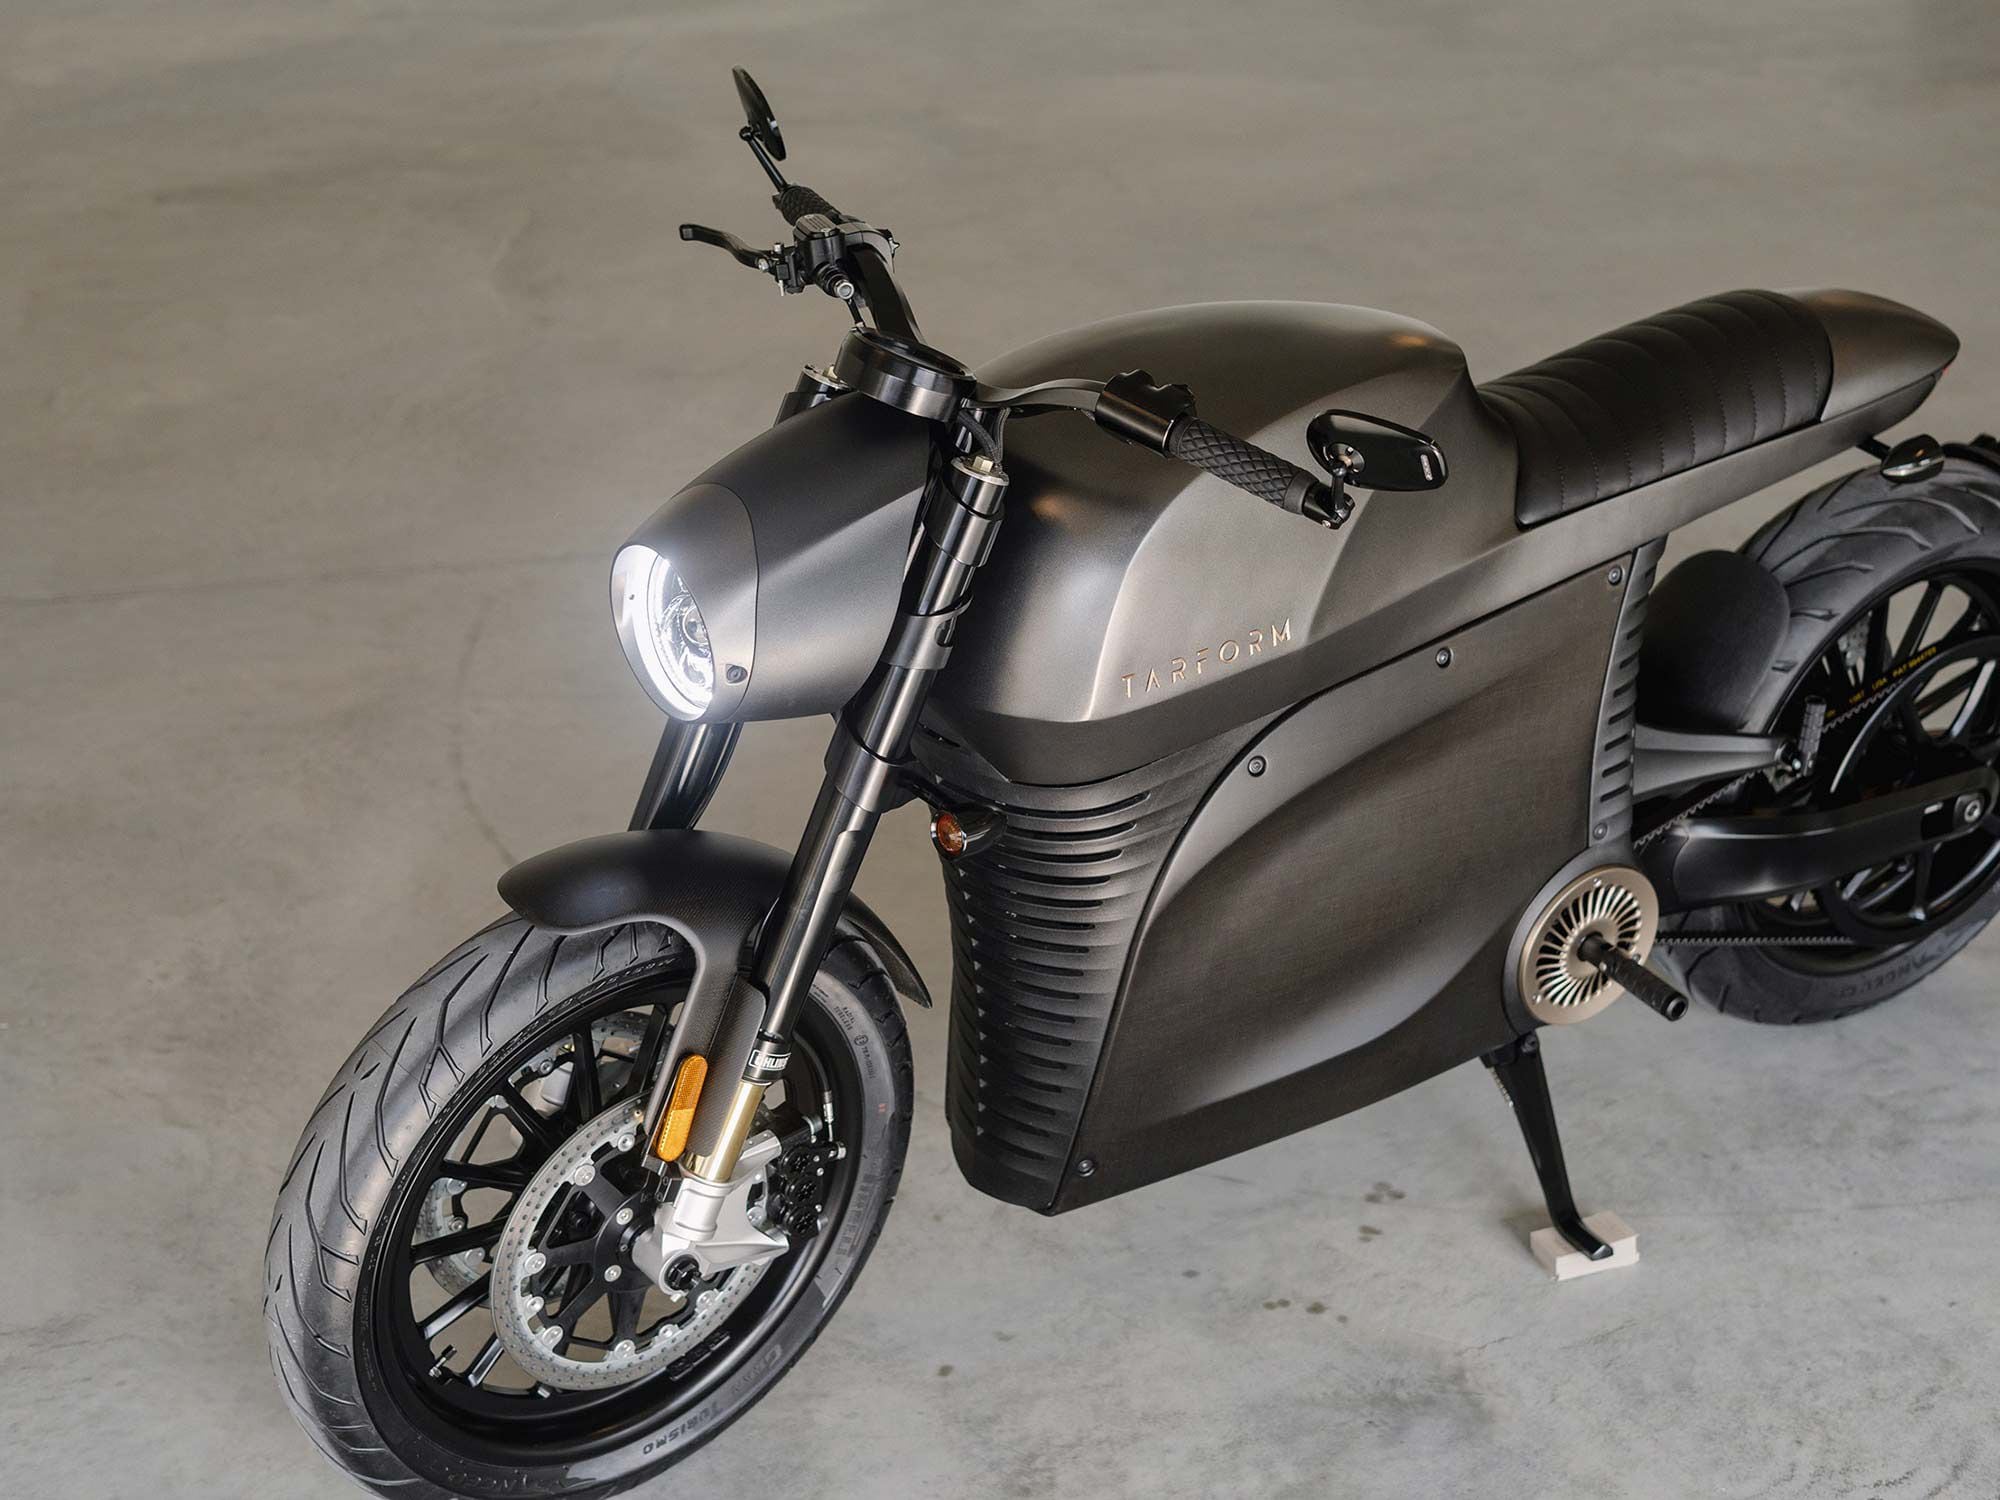 Tarform's Luna Electric Hits The Streets At Last Motorcycle, 53% OFF